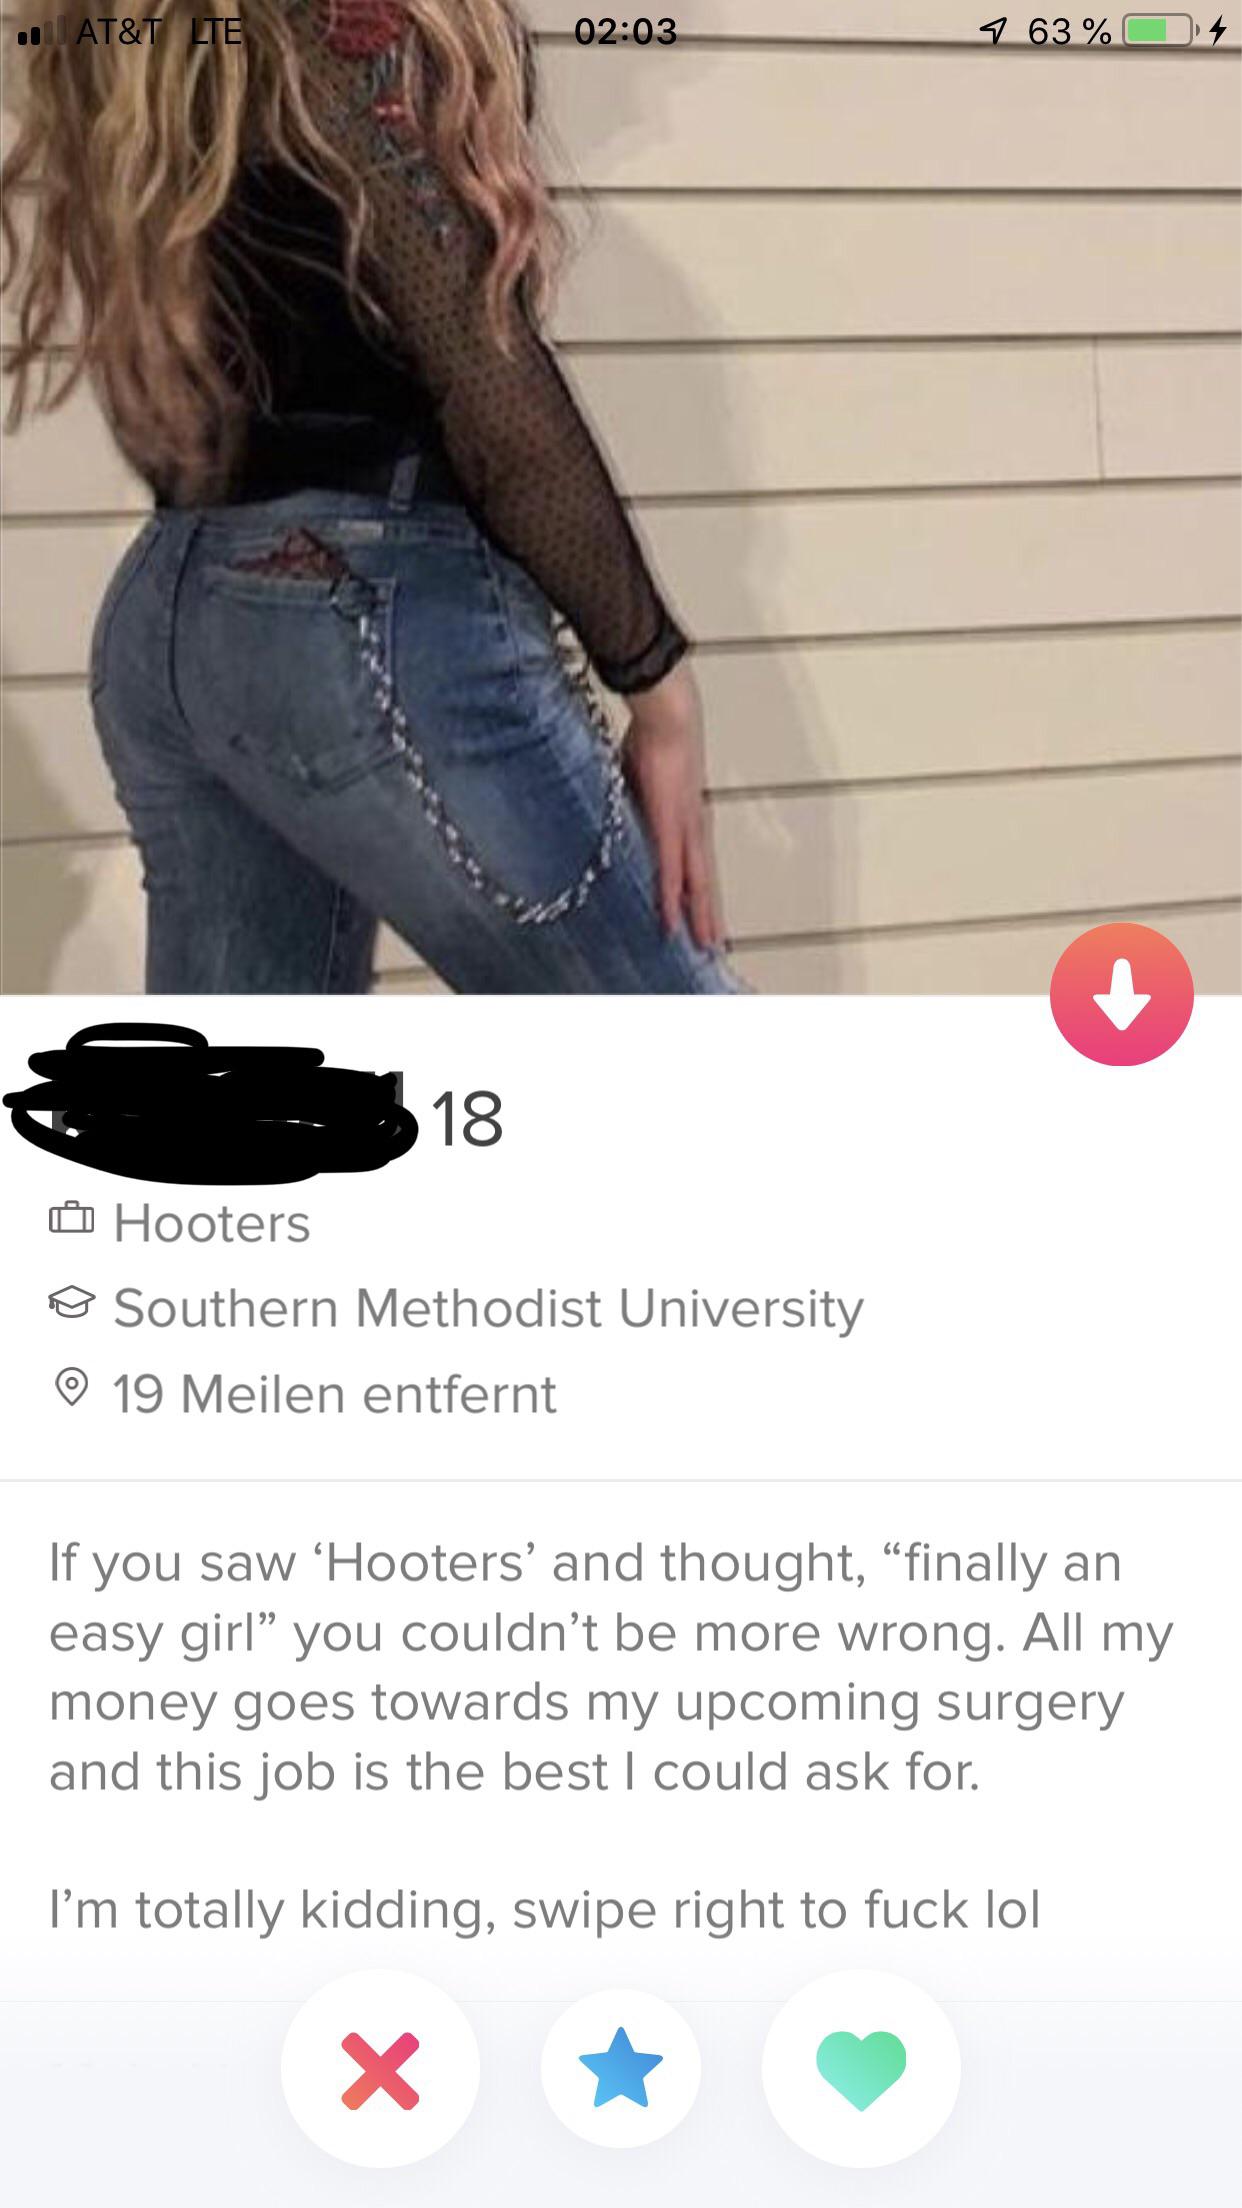 tinder - shoulder - . At&T Lte 9 63% O4 18 Hooters Southern Methodist University 19 Meilen entfernt If you saw 'Hooters' and thought, finally an easy girl you couldn't be more wrong. All my money goes towards my upcoming surgery and this job is the best I